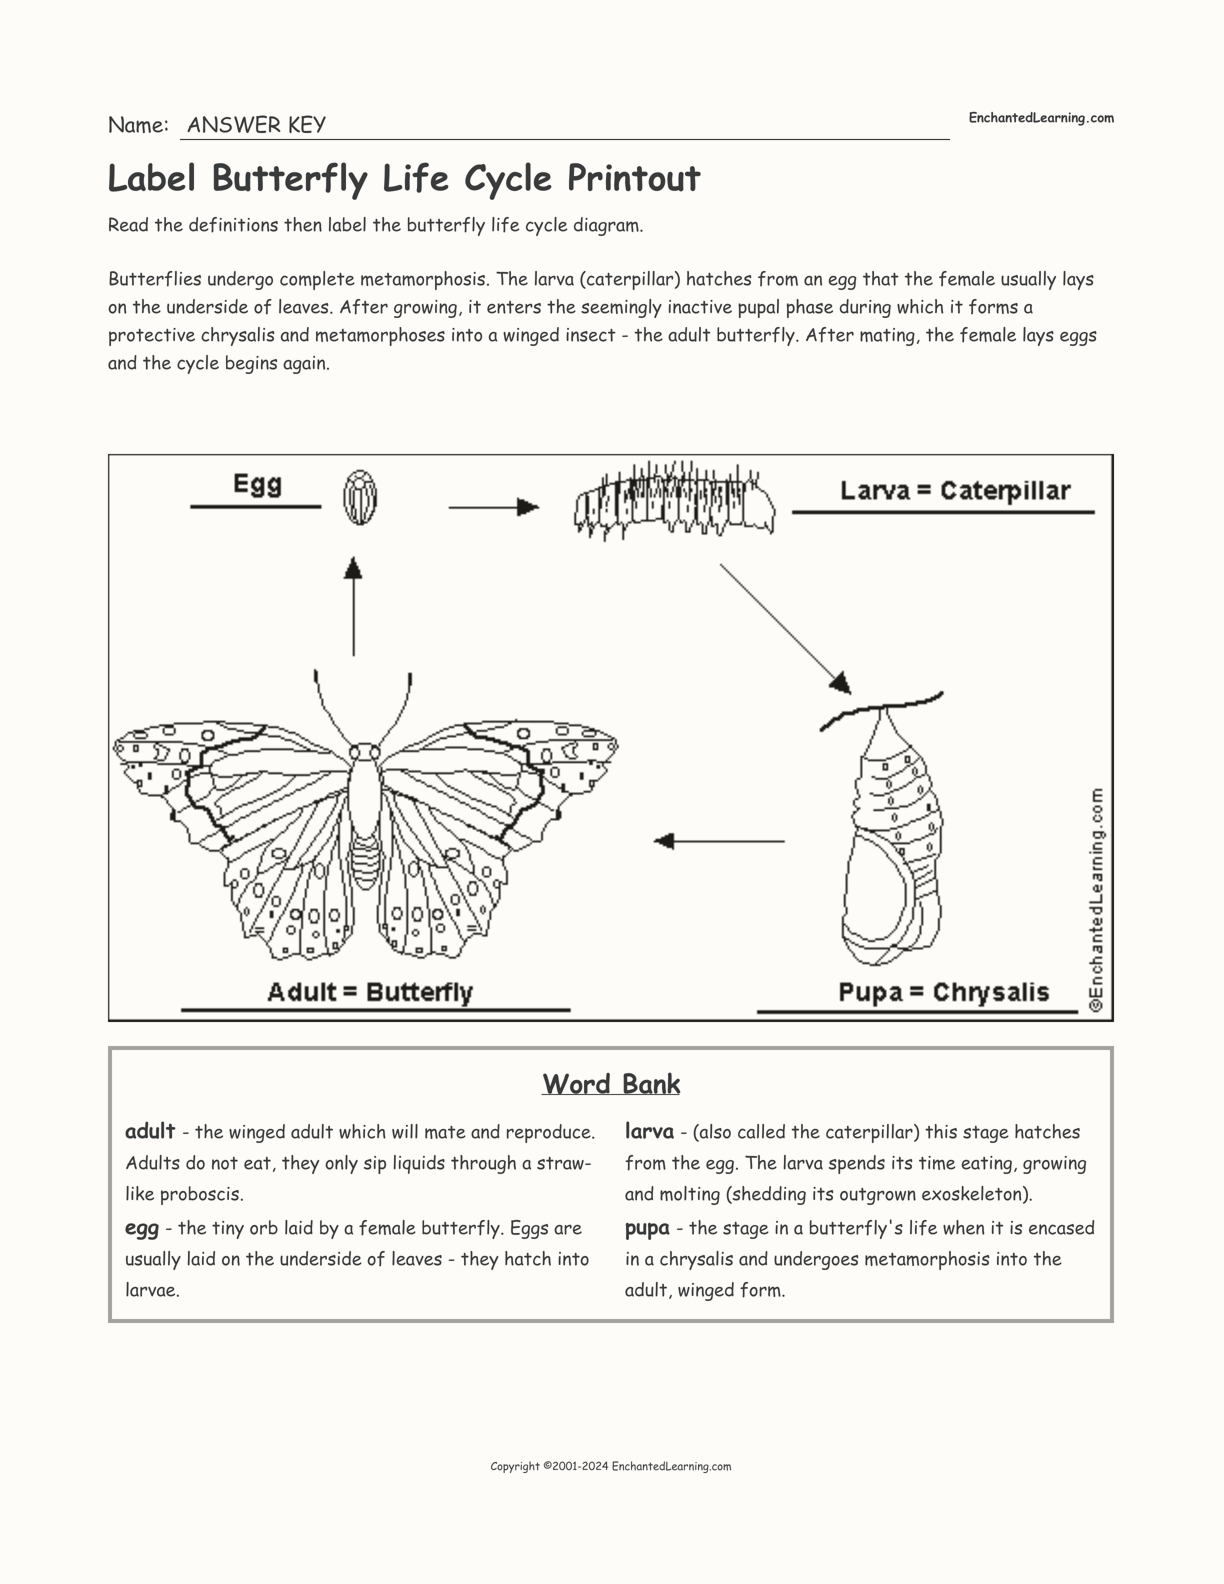 Label Butterfly Life Cycle Printout interactive worksheet page 2